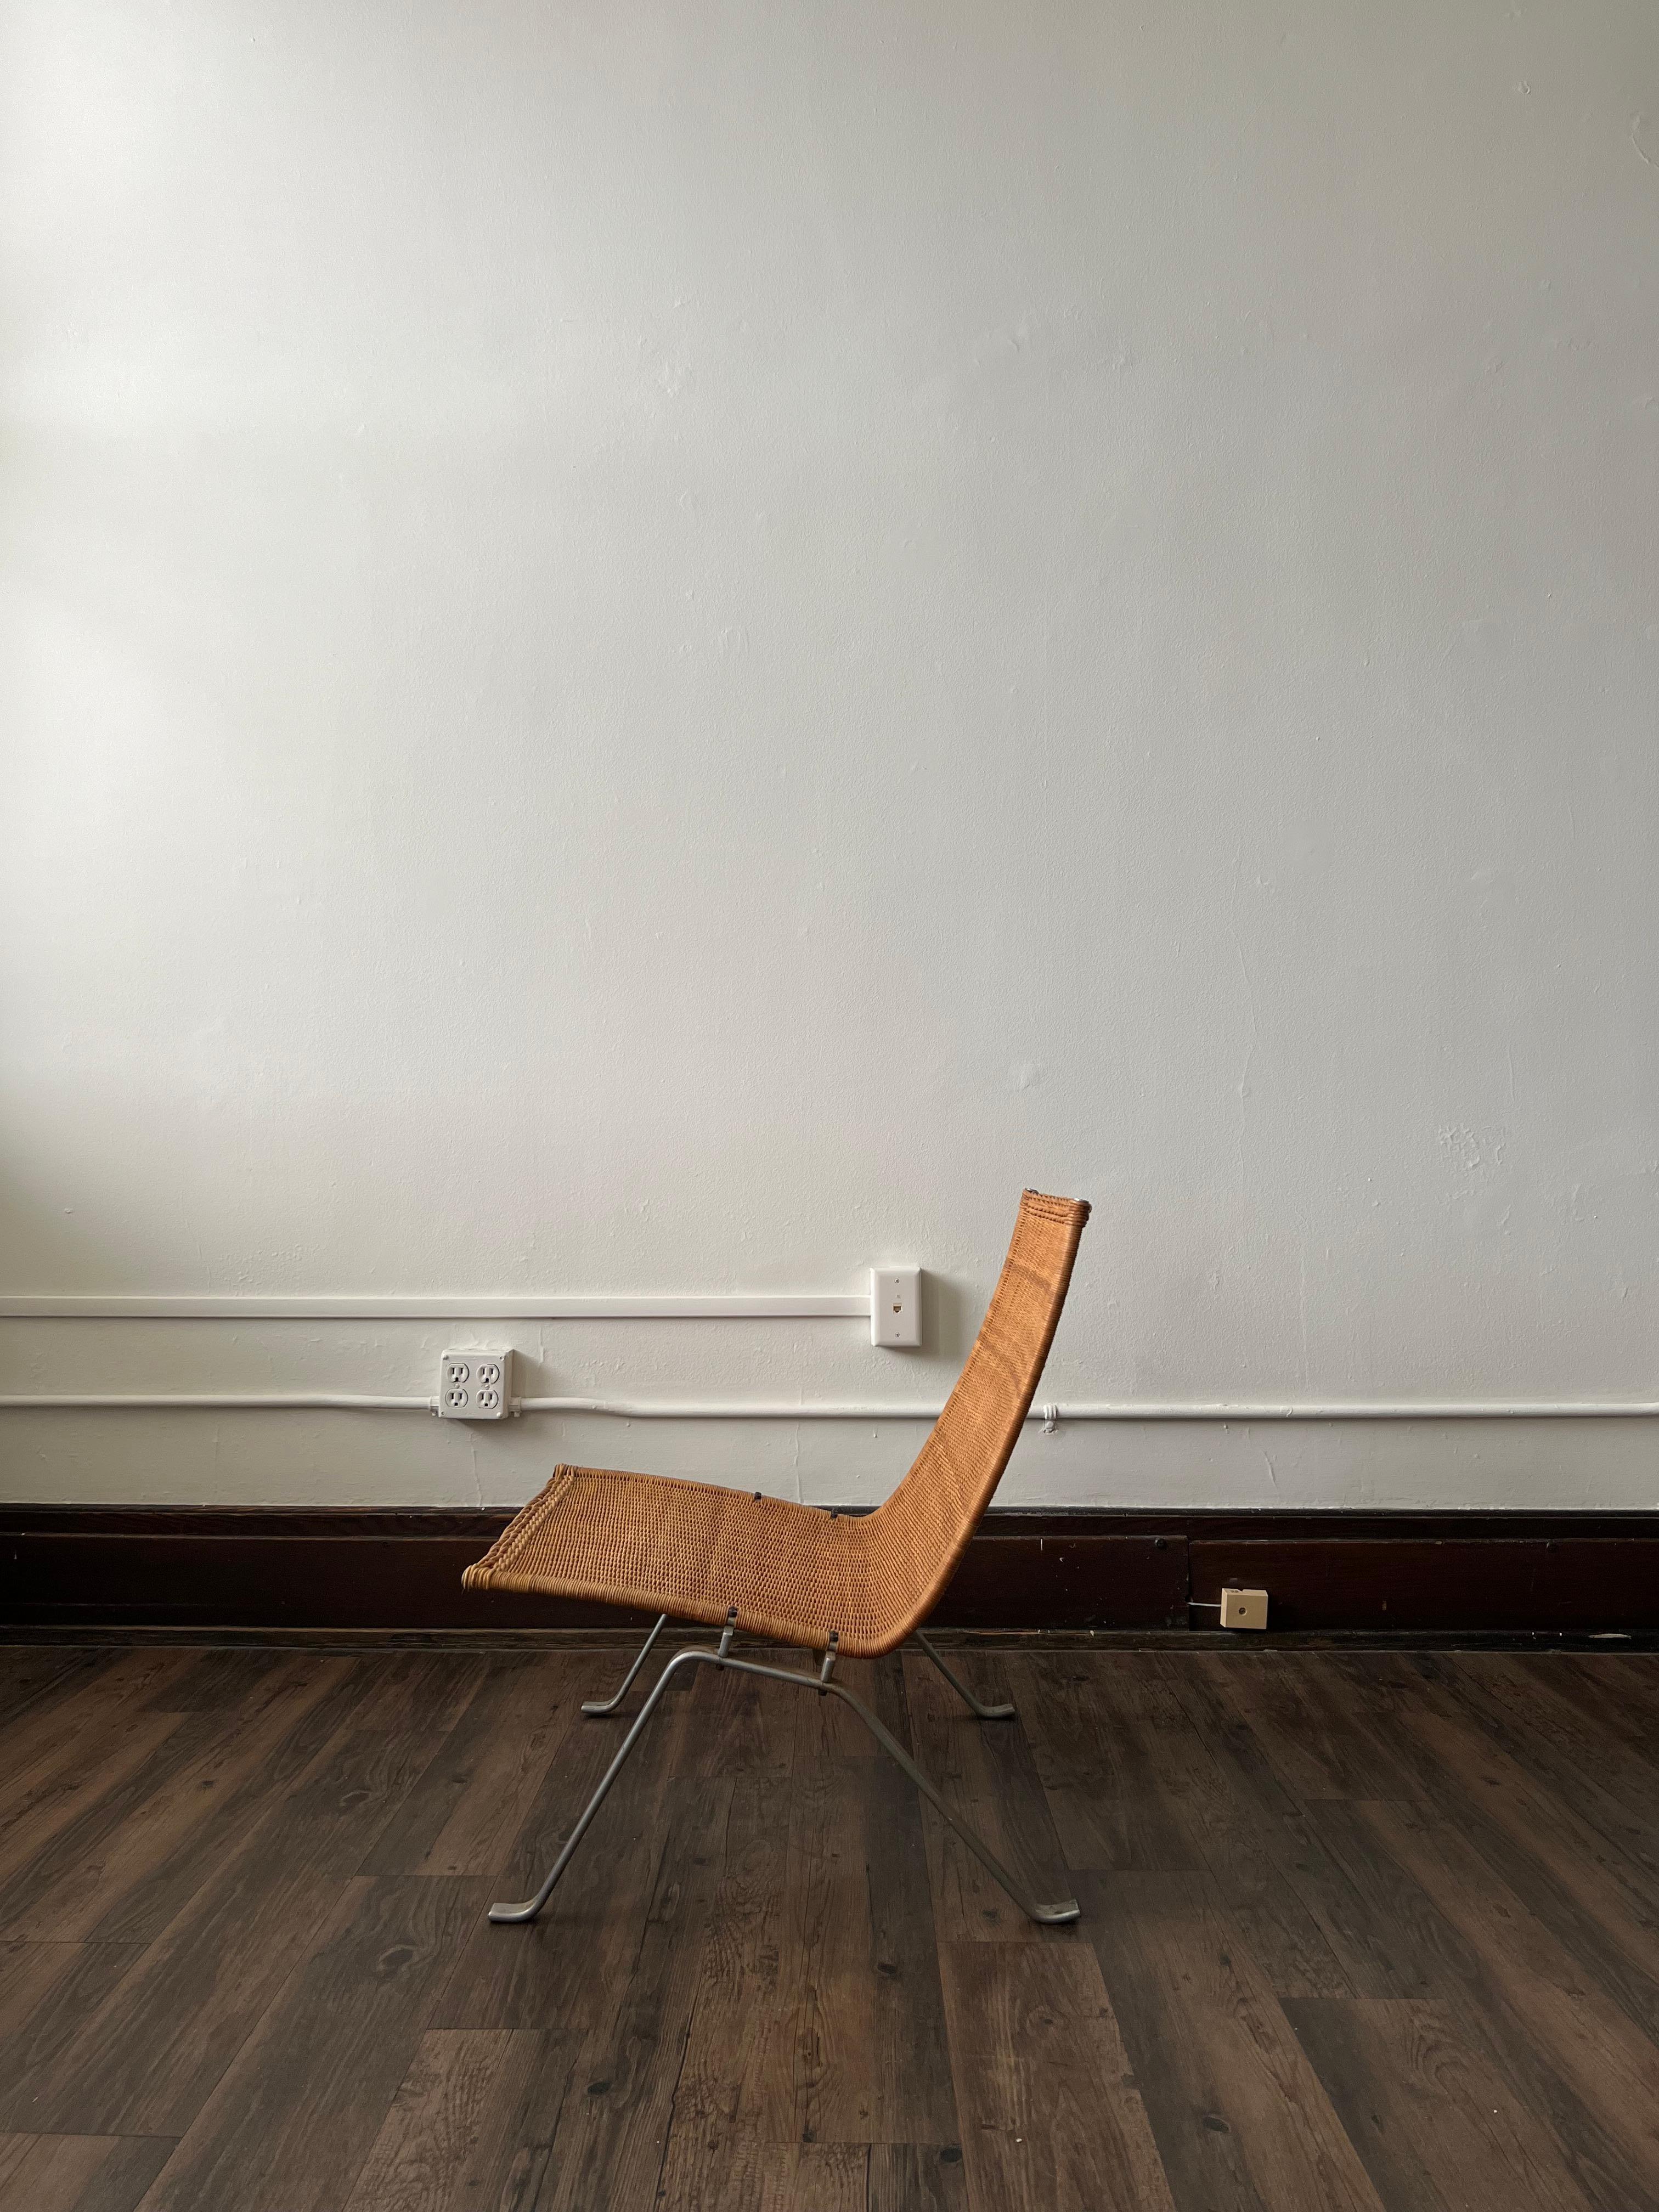 This is a rare early edition PK22 by famed Danish designer, Poul Kjærholm. Manufactured by Ejvind Kold Christensen, this model long predates any current models available from Fritz Hansen.

Kjærholm's designs are know for their architectural nature